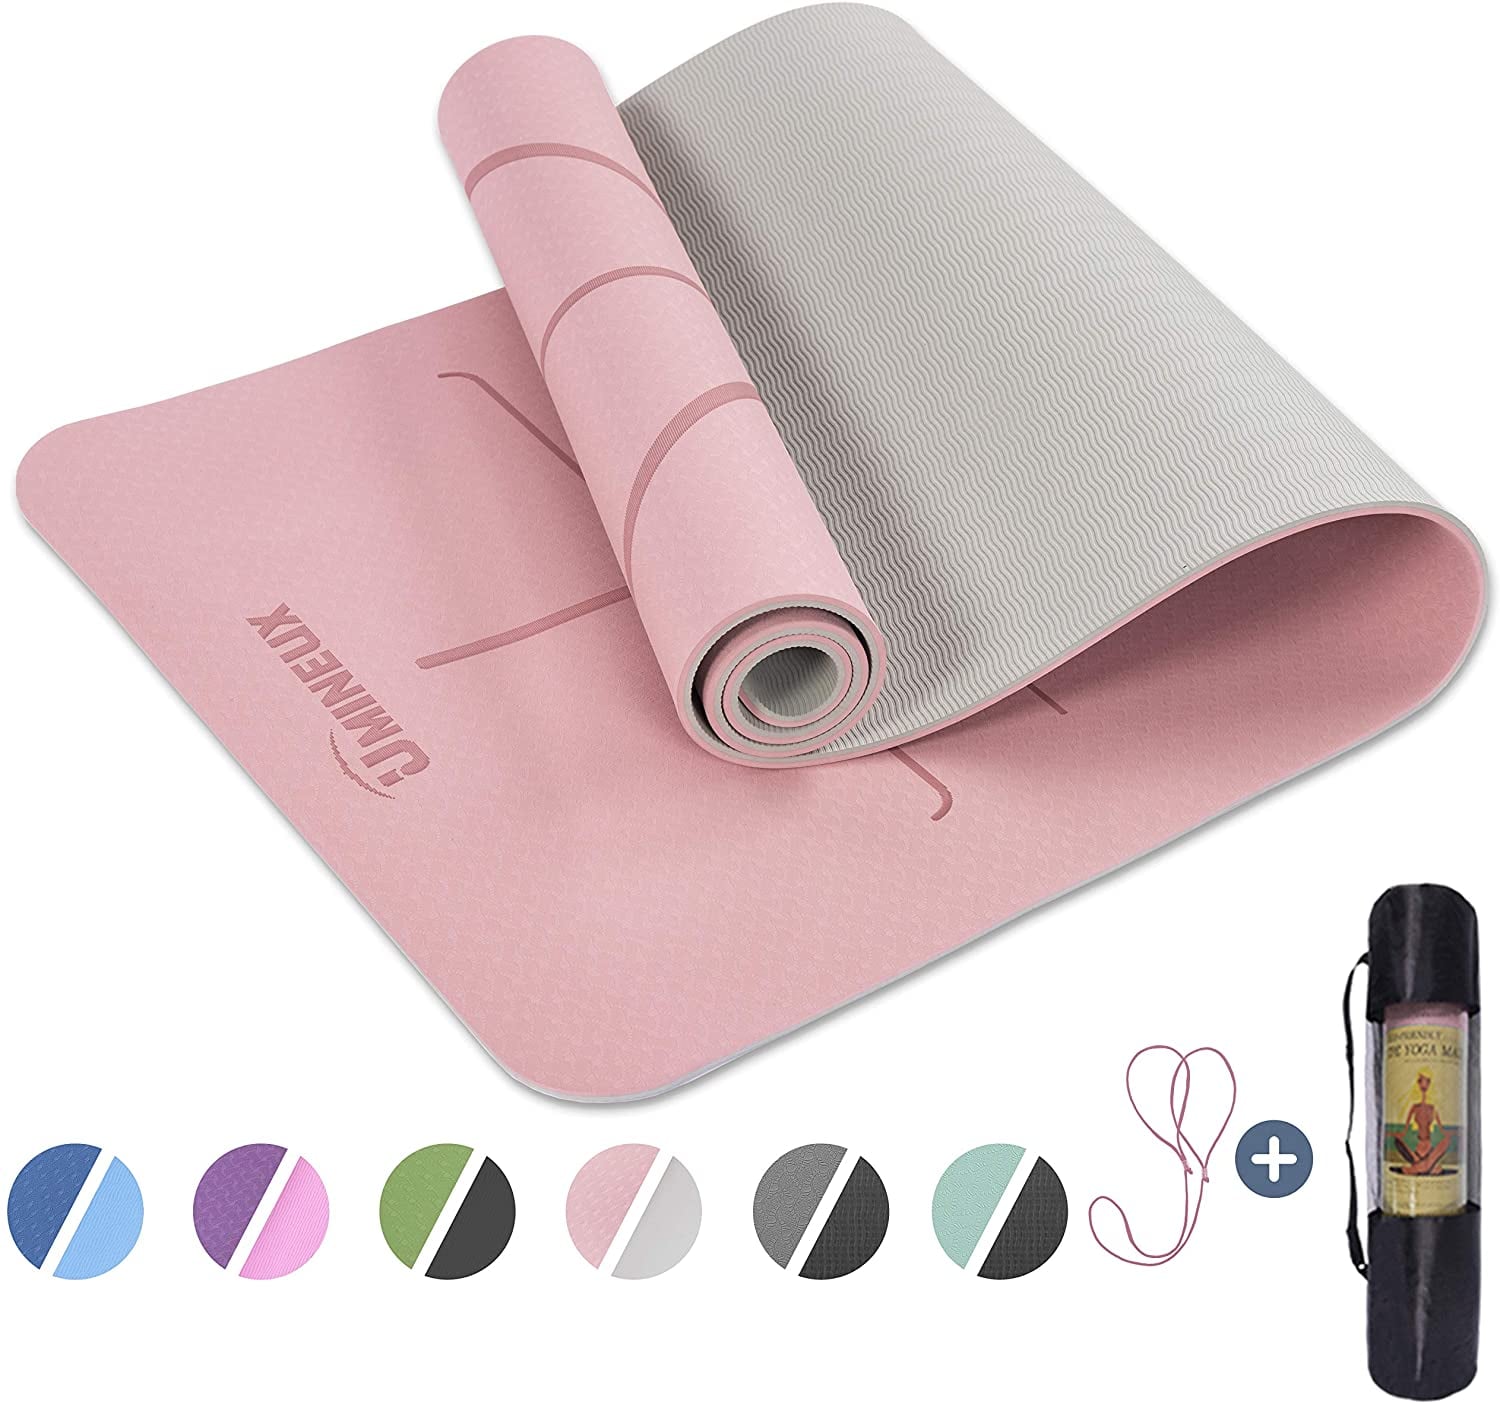 An At-Home Gym Find: Umineux Yoga Mat